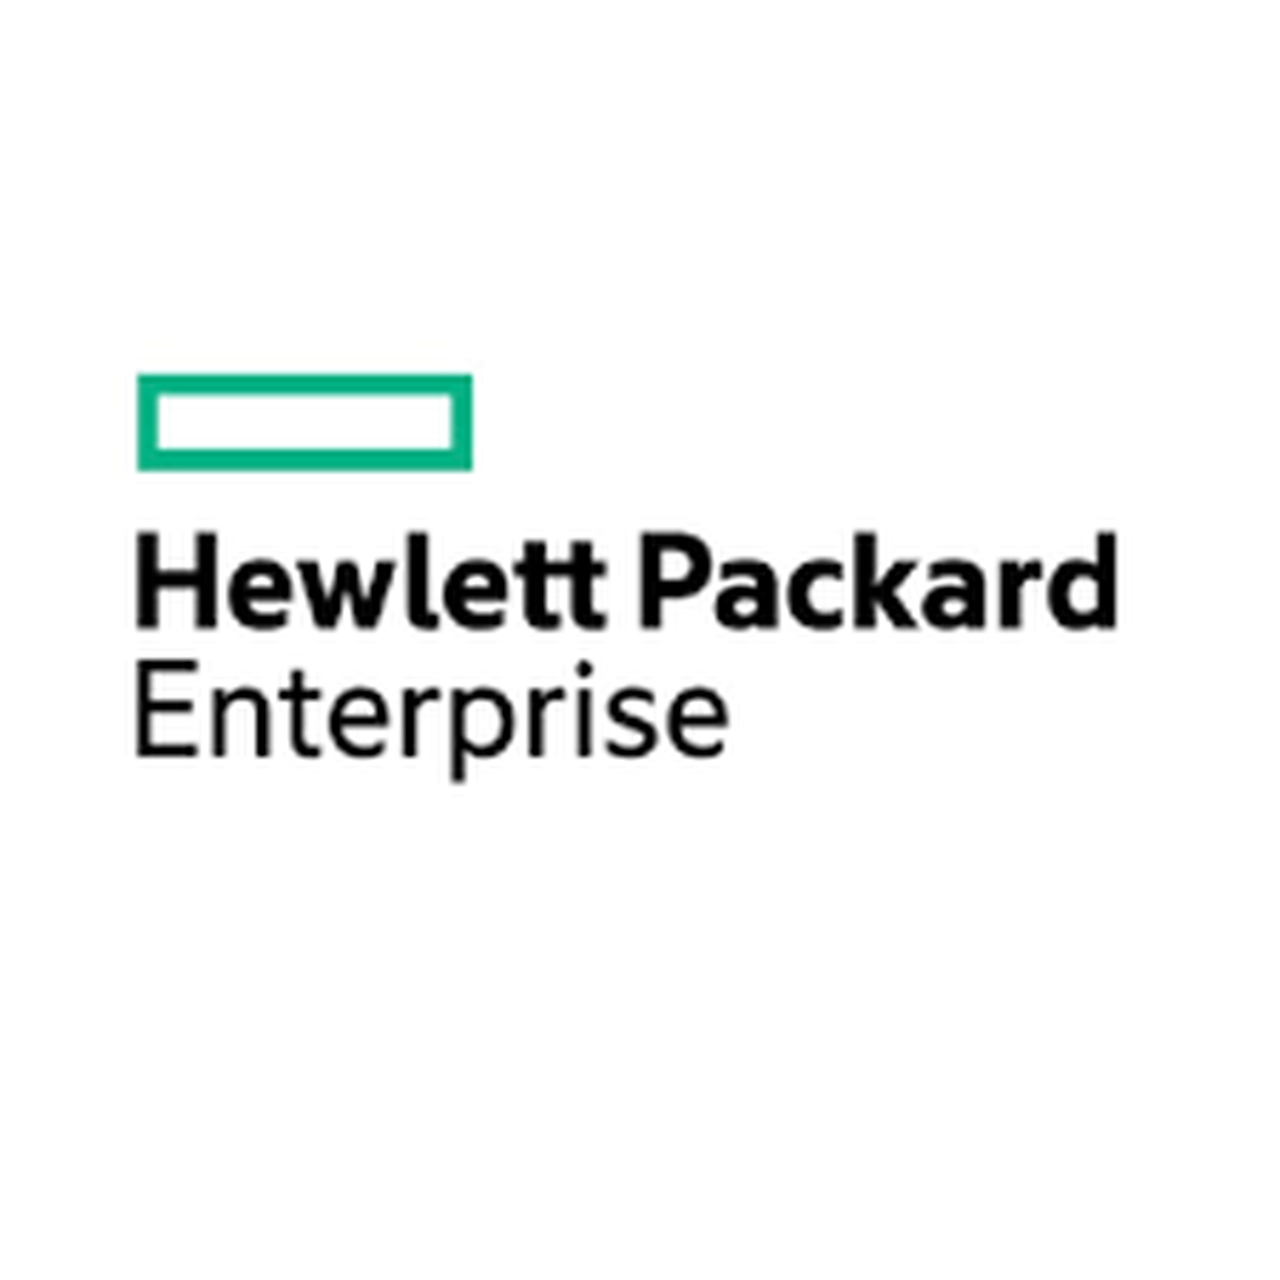 HPE Smart Hbrd Cpctor w/ 260mm Reman Cable Factory integrated (Sourcing) - HPE Discontinued Product)